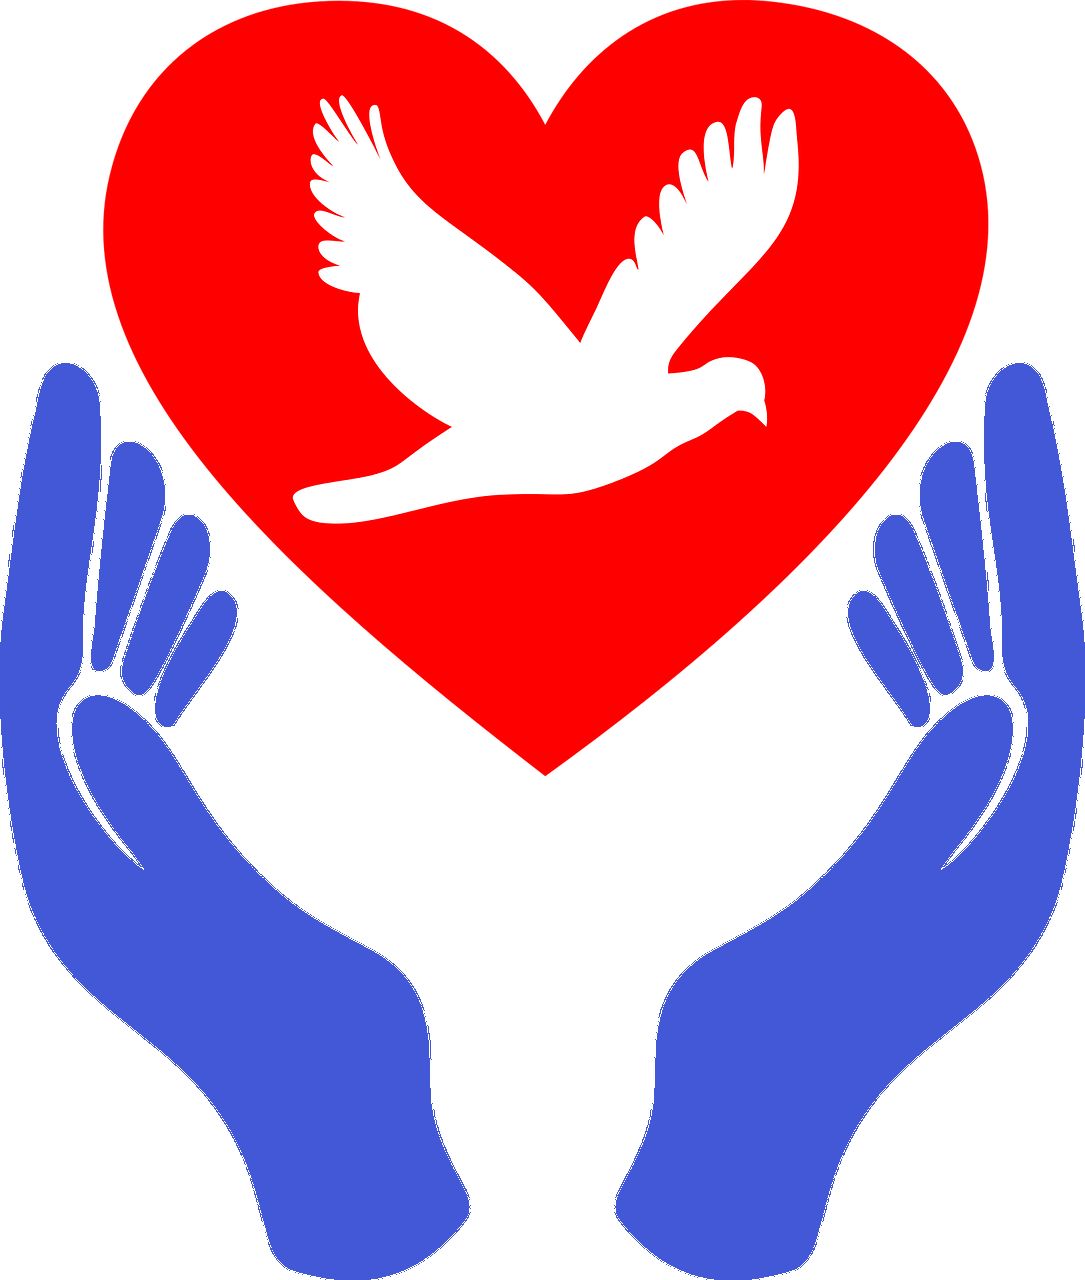 Prayer For The Us And The World - Symbols Of Love And Peace (1085x1280)